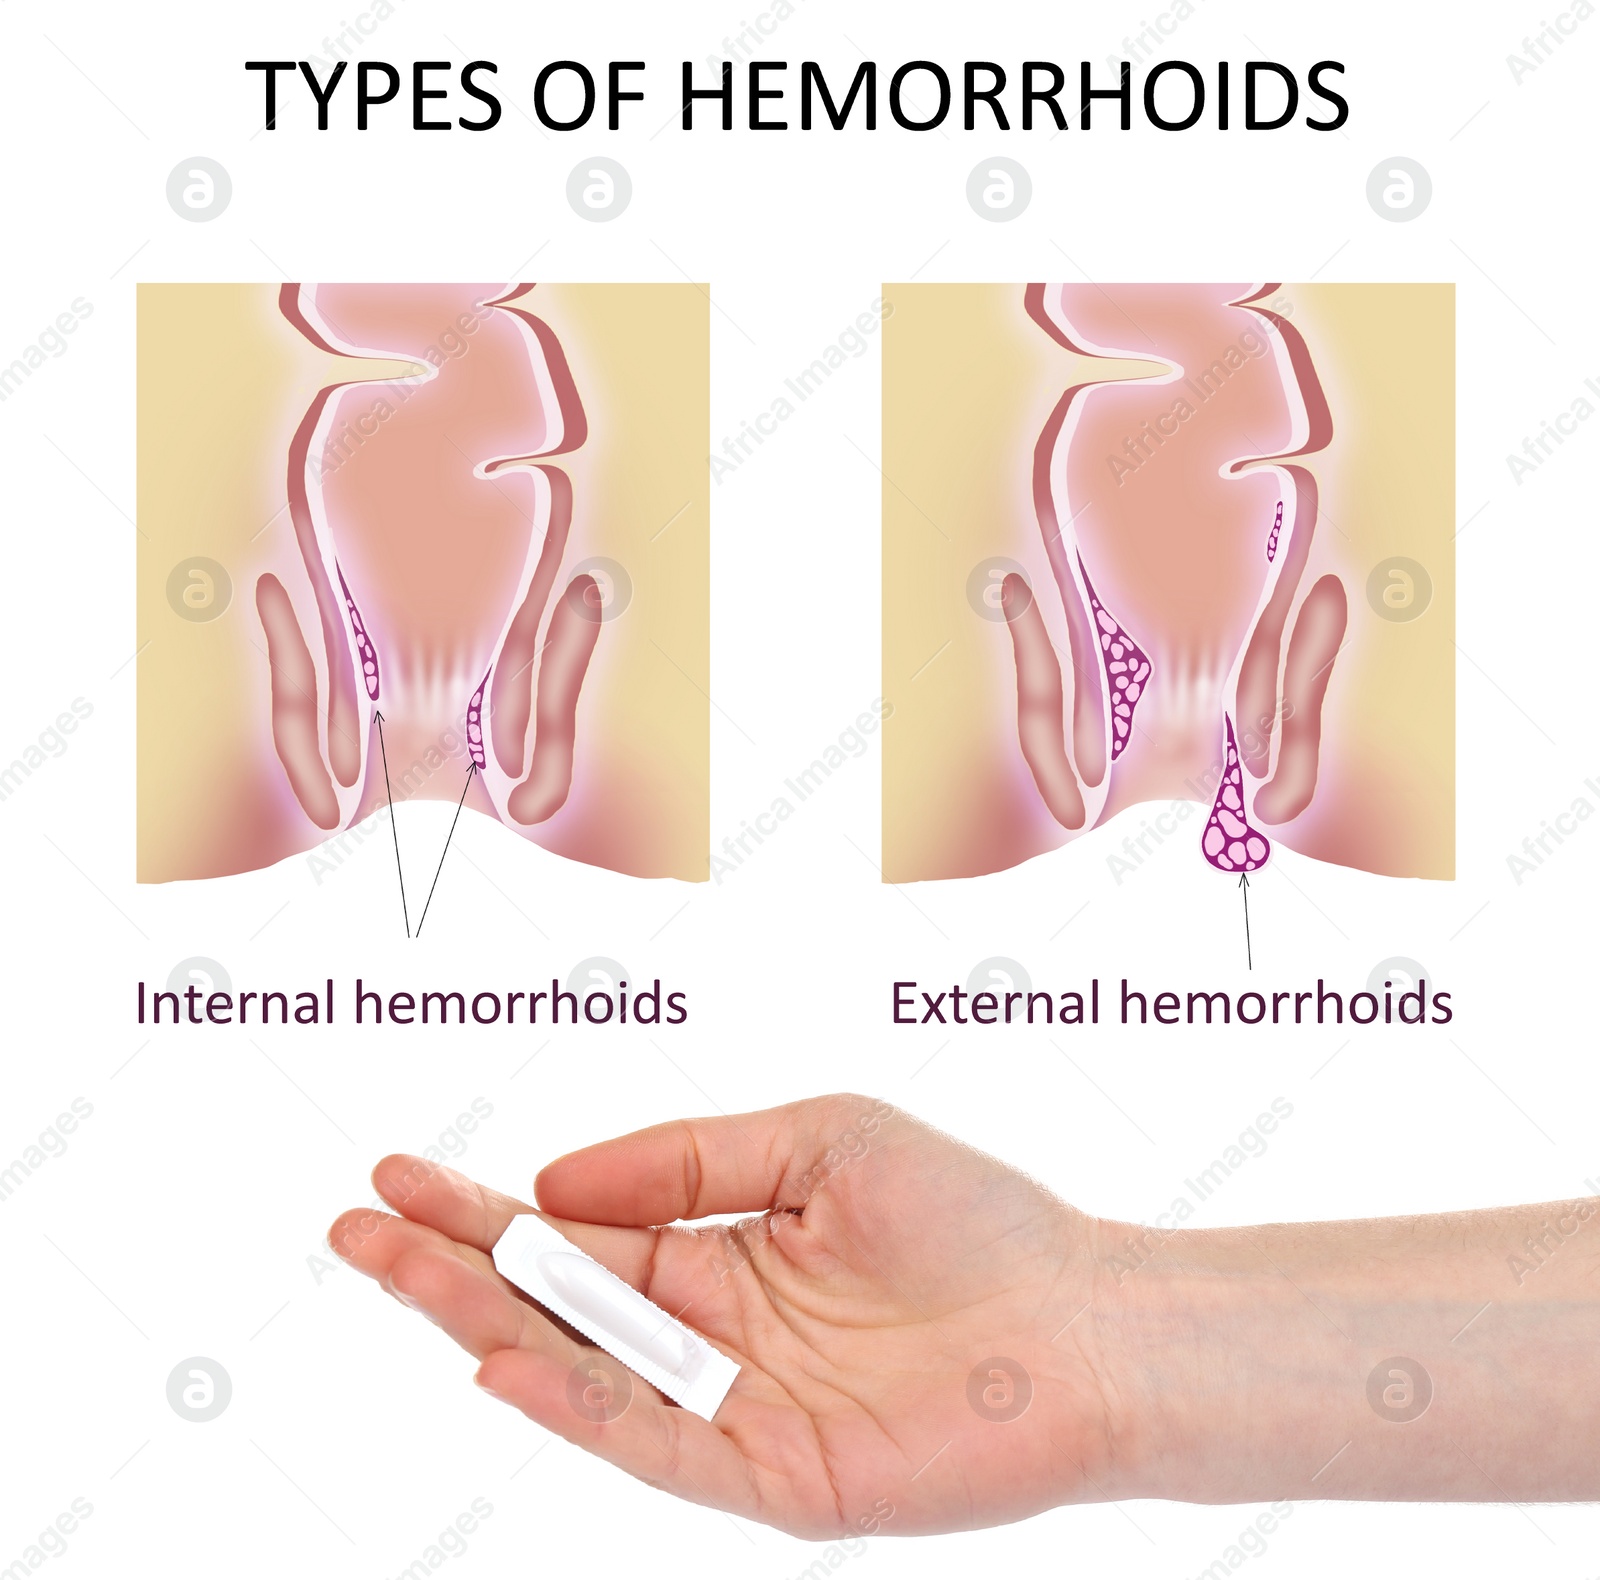 Image of Woman holding suppository for hemorrhoid treatment under illustrations of lower rectum on white background